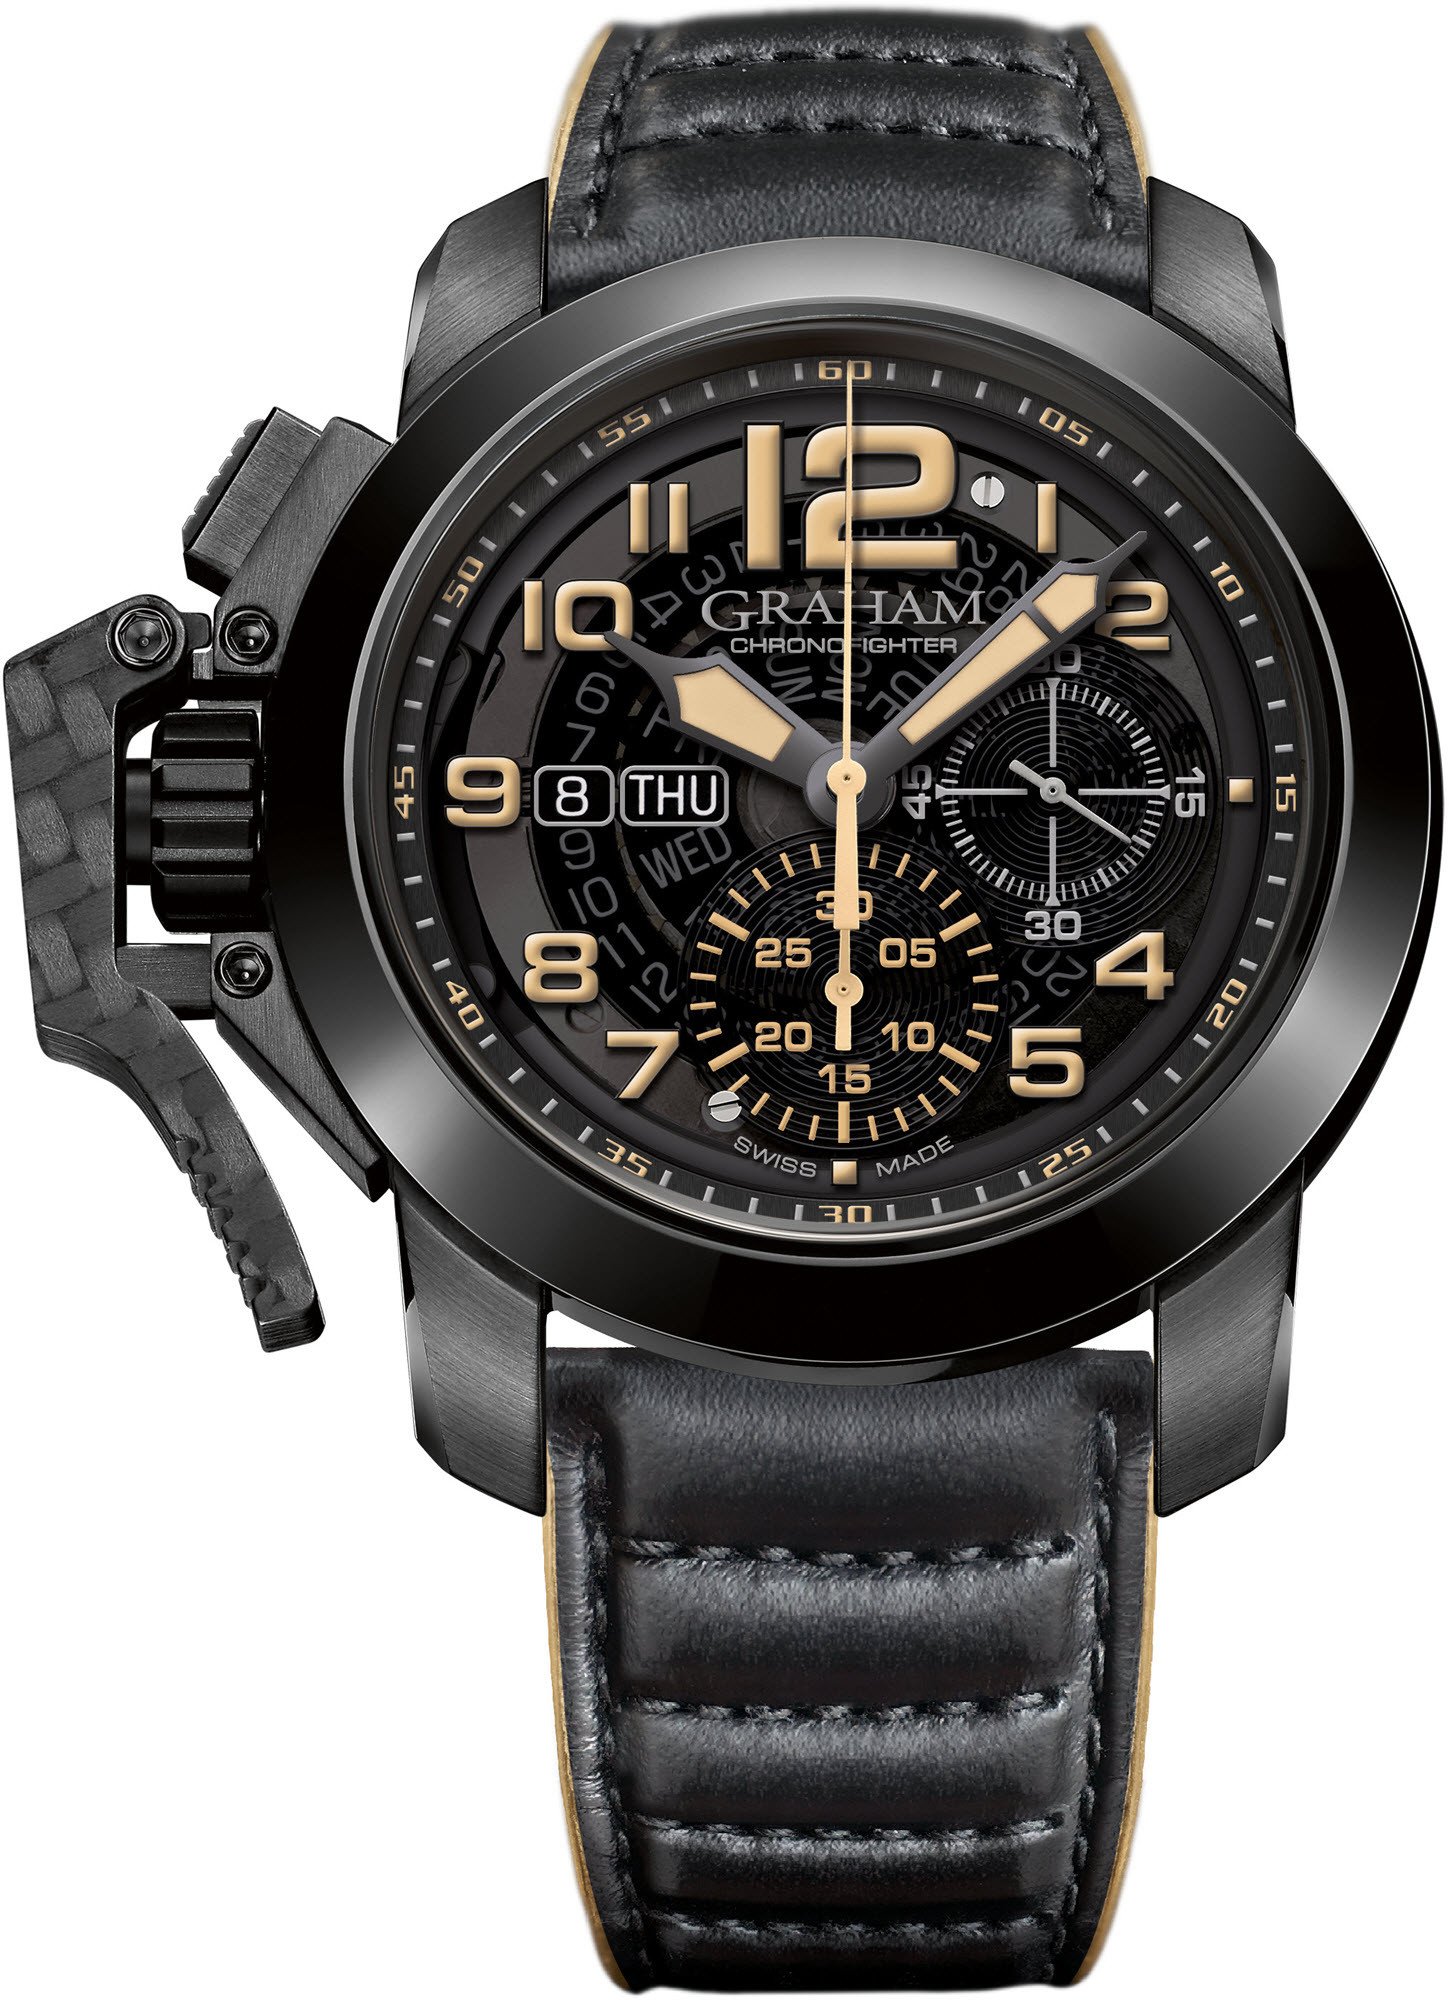 Chrnofighter Target in Black PVD on Black Leather Strap with Grey Camouflage Dial